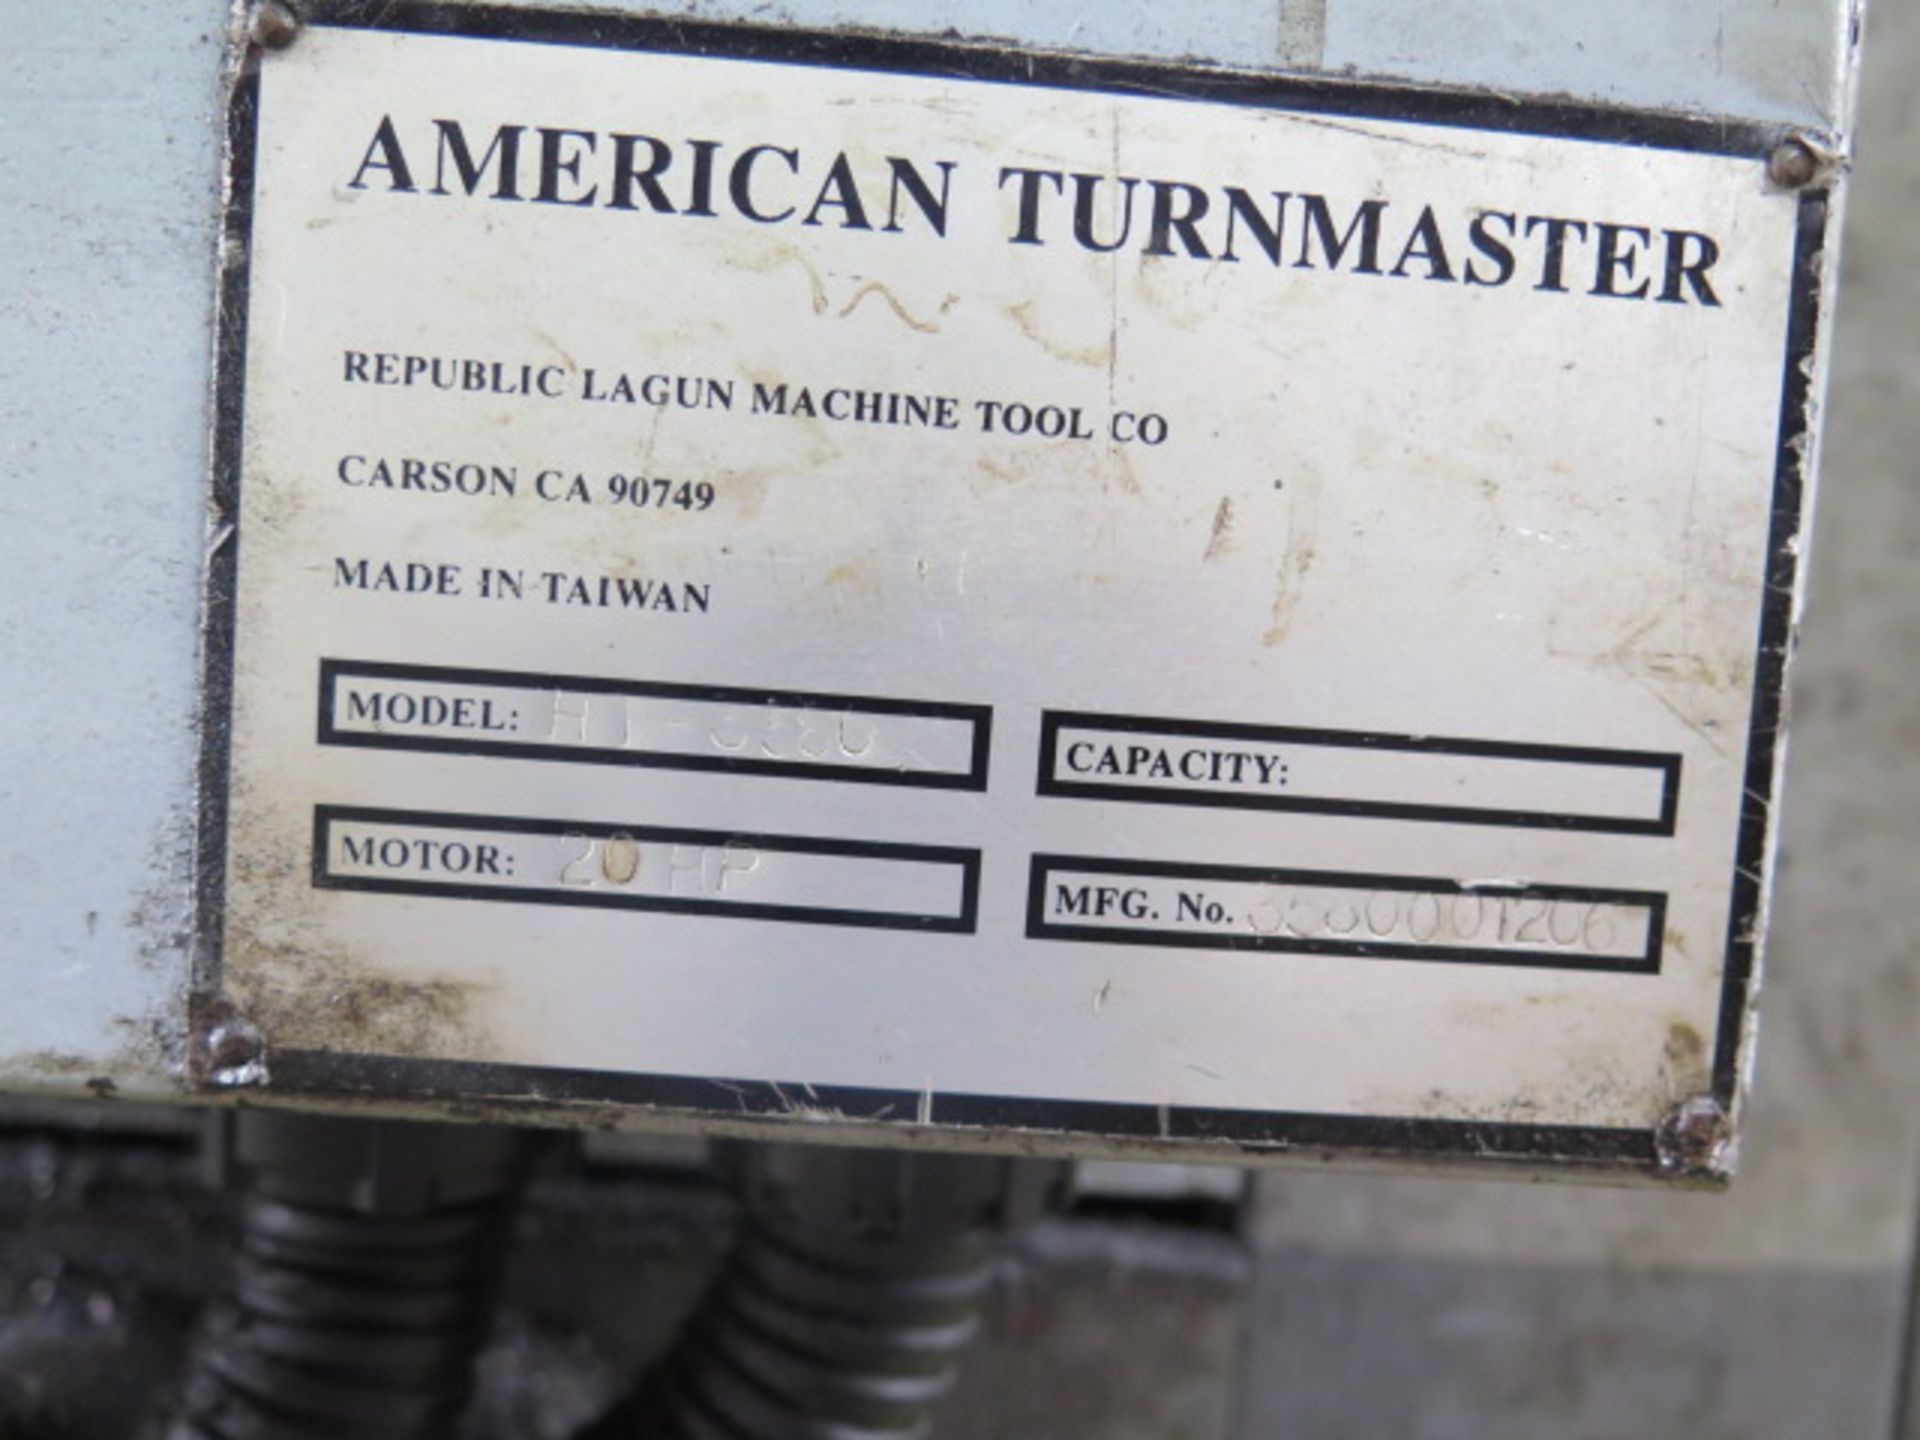 American Turnmaster HT-3580 35” x 80” Big Bore Geared Gap Bed Lathe w/ 6” Spindle Bore, SOLD AS IS - Image 15 of 15